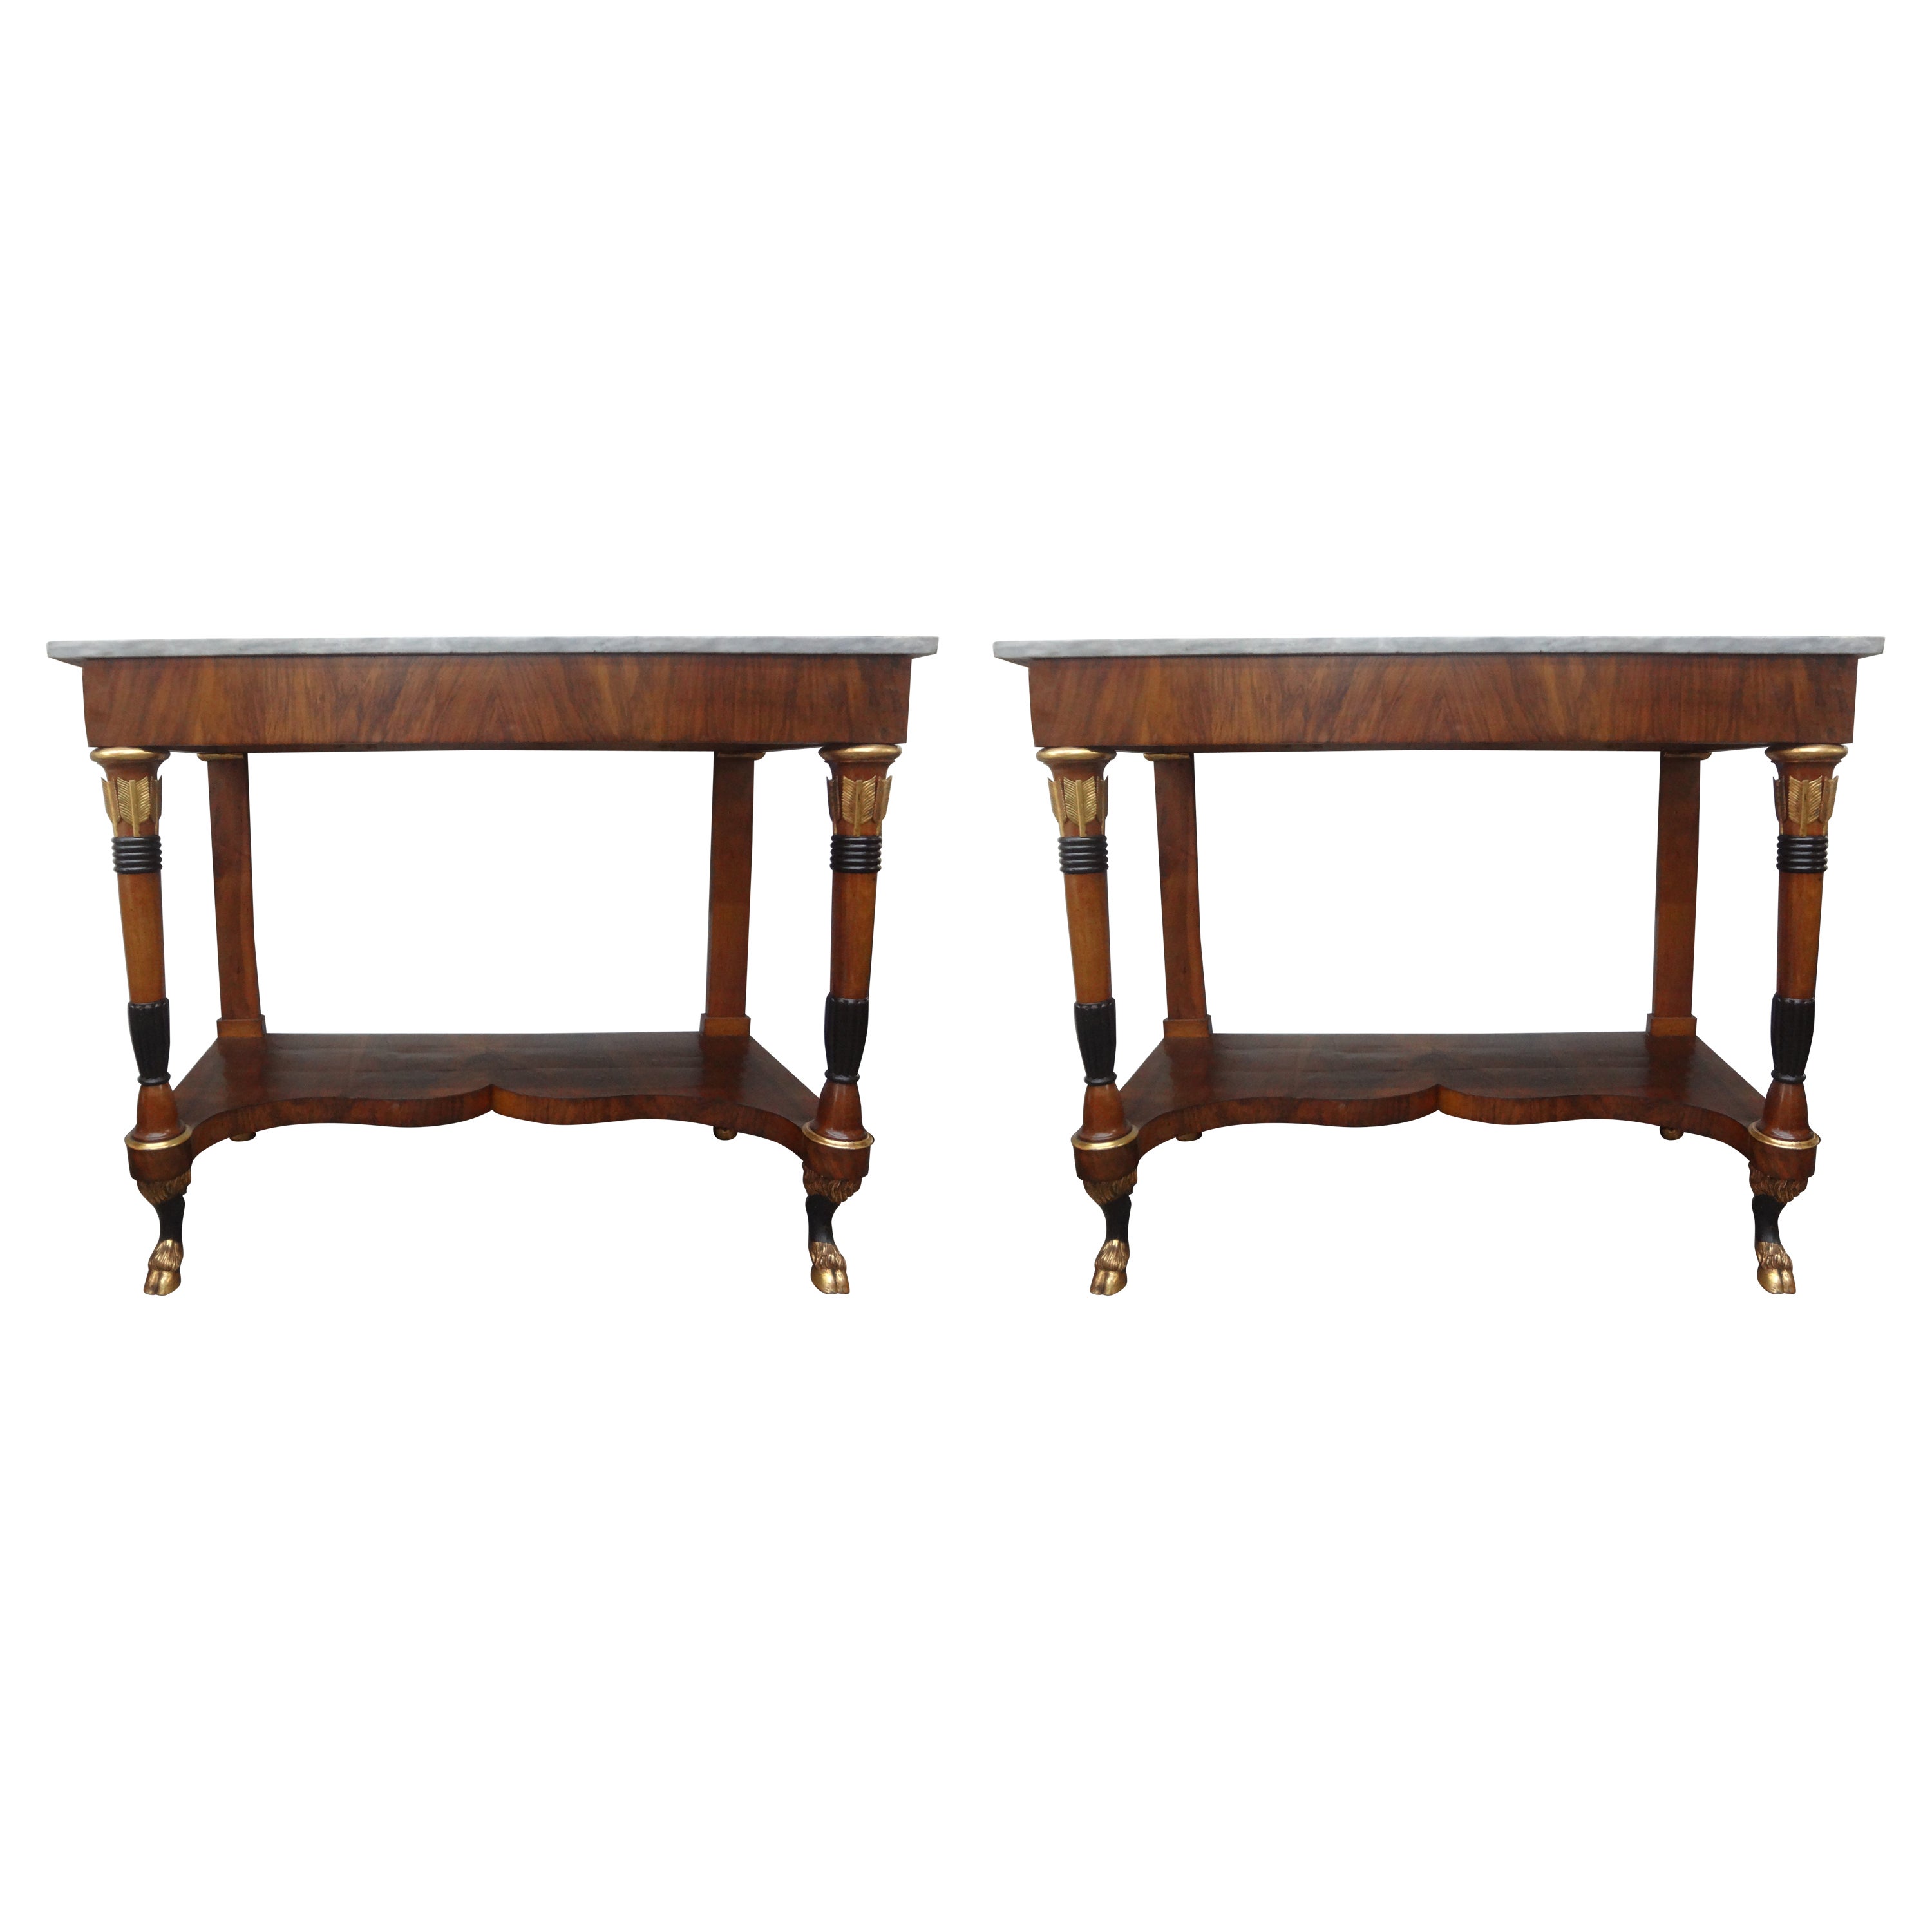 Outstanding Pair of 19th Century Italian Empire Console Tables